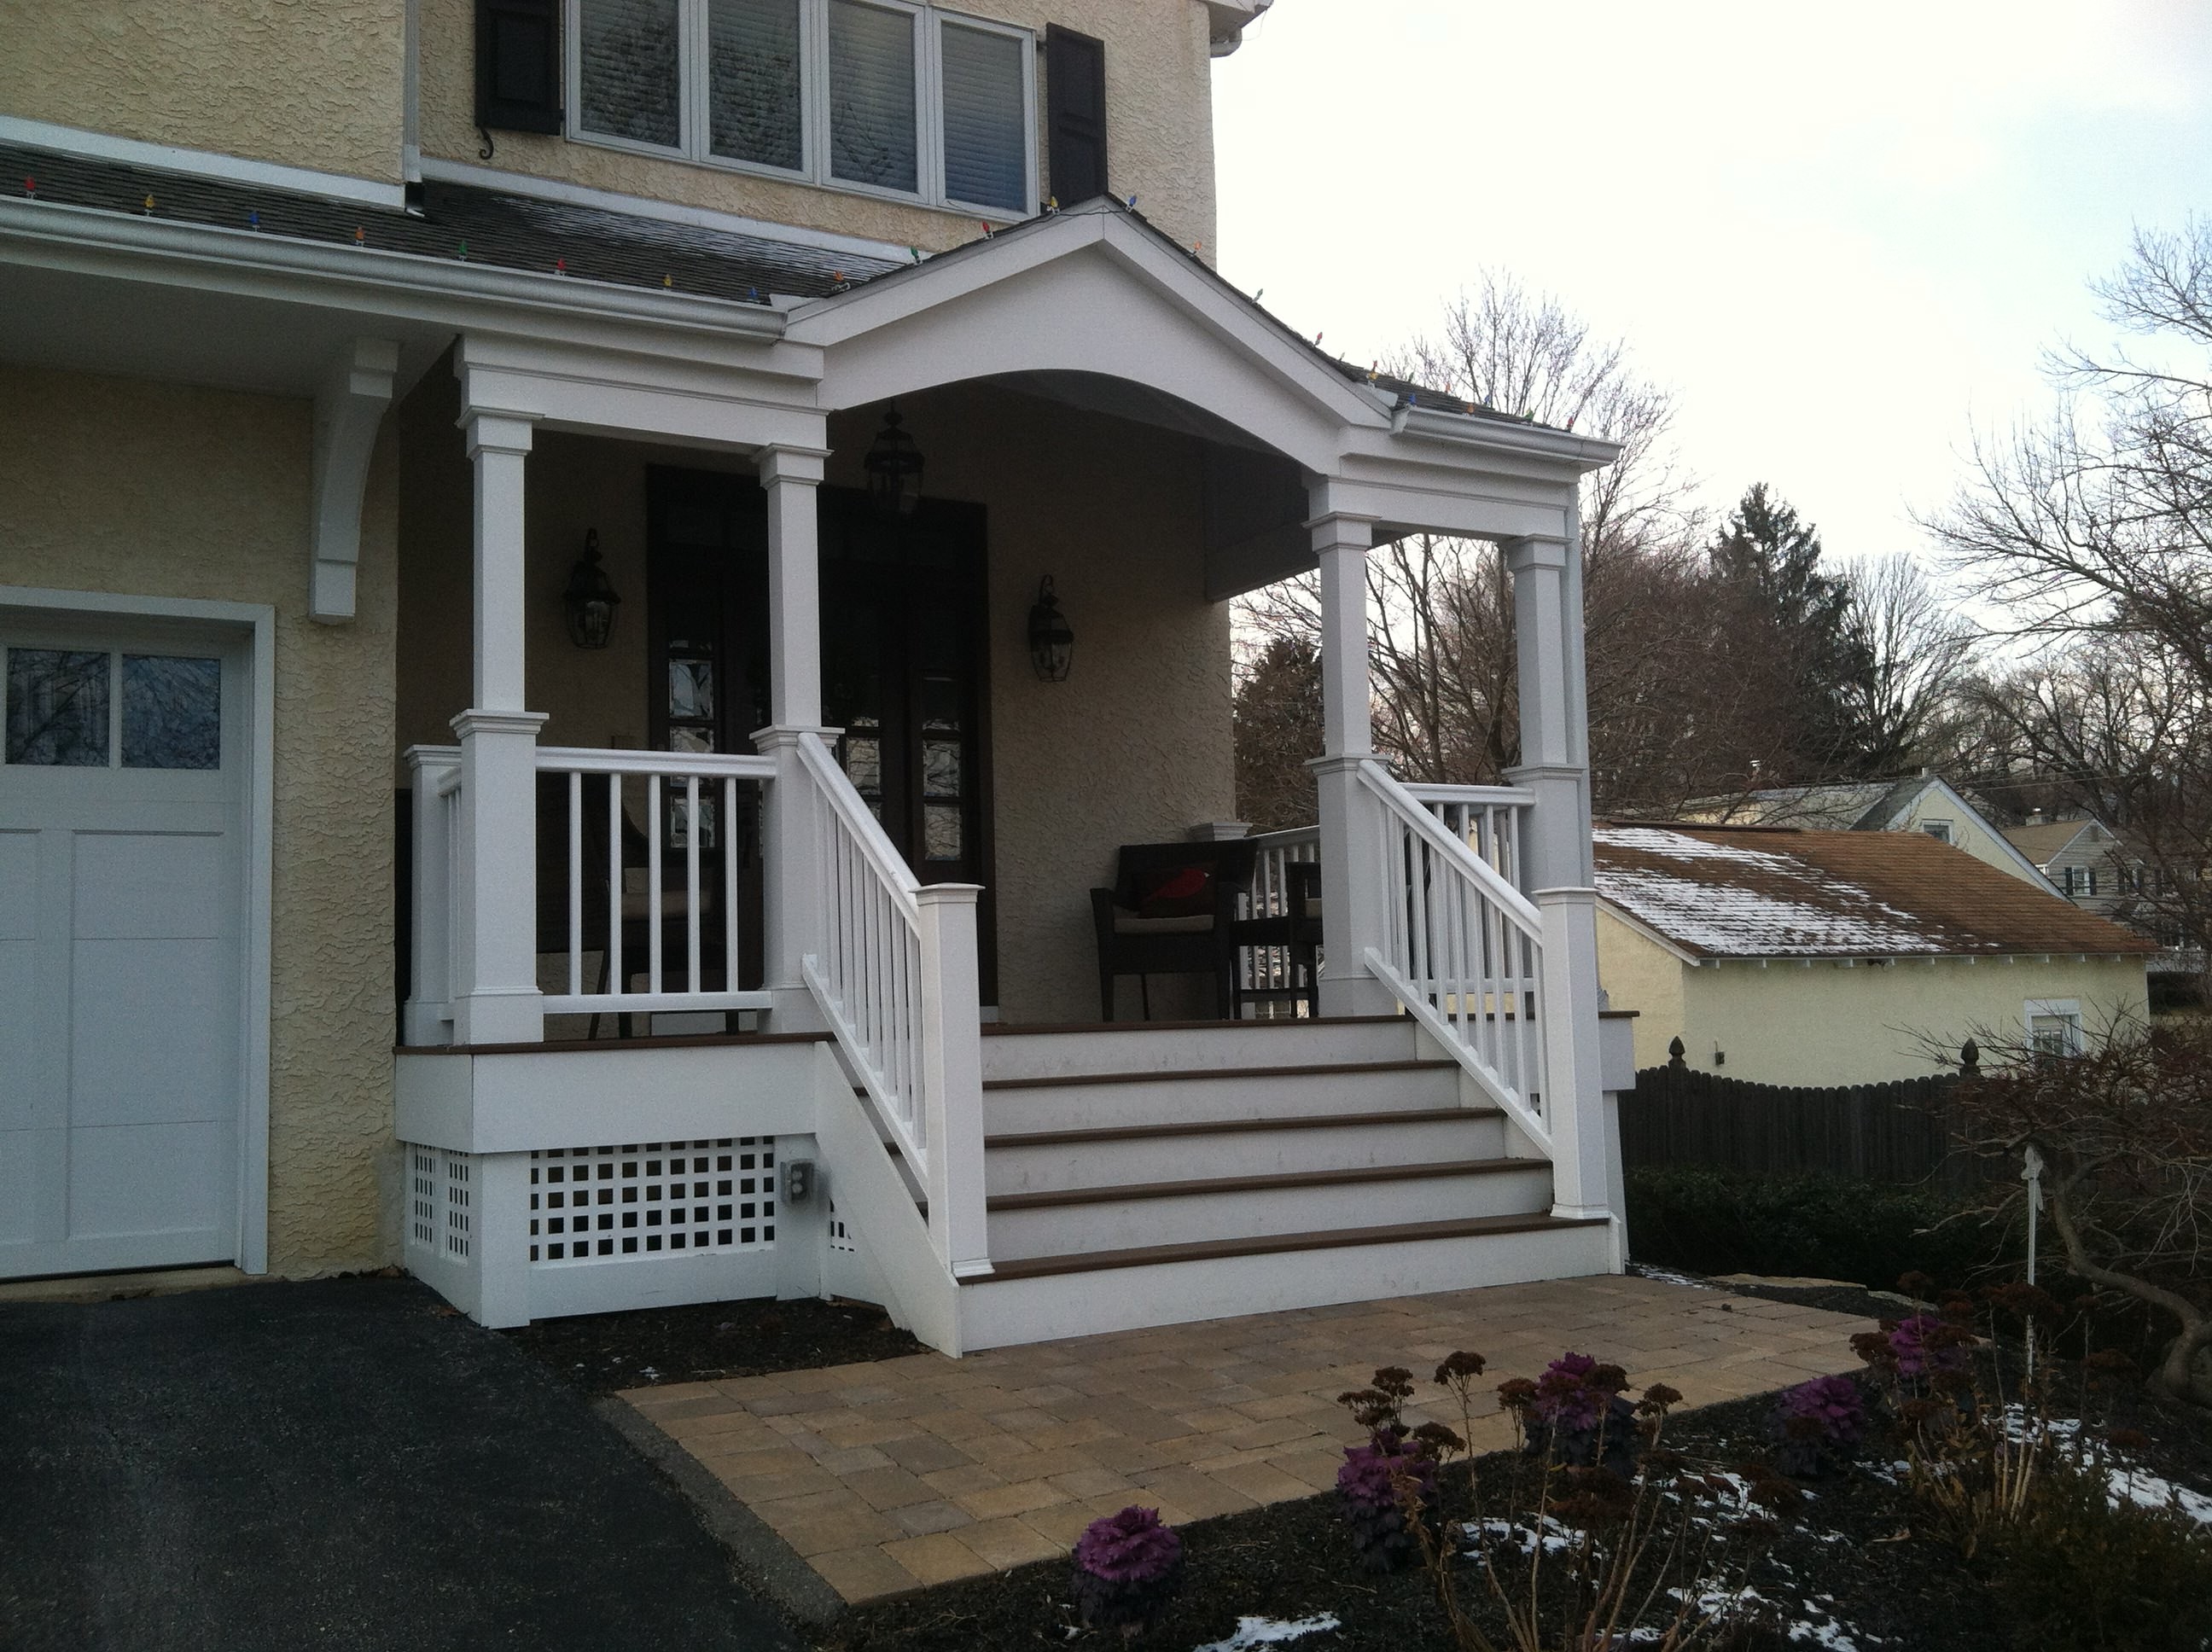 Portico Designs That Suits The Architecture of Your Home